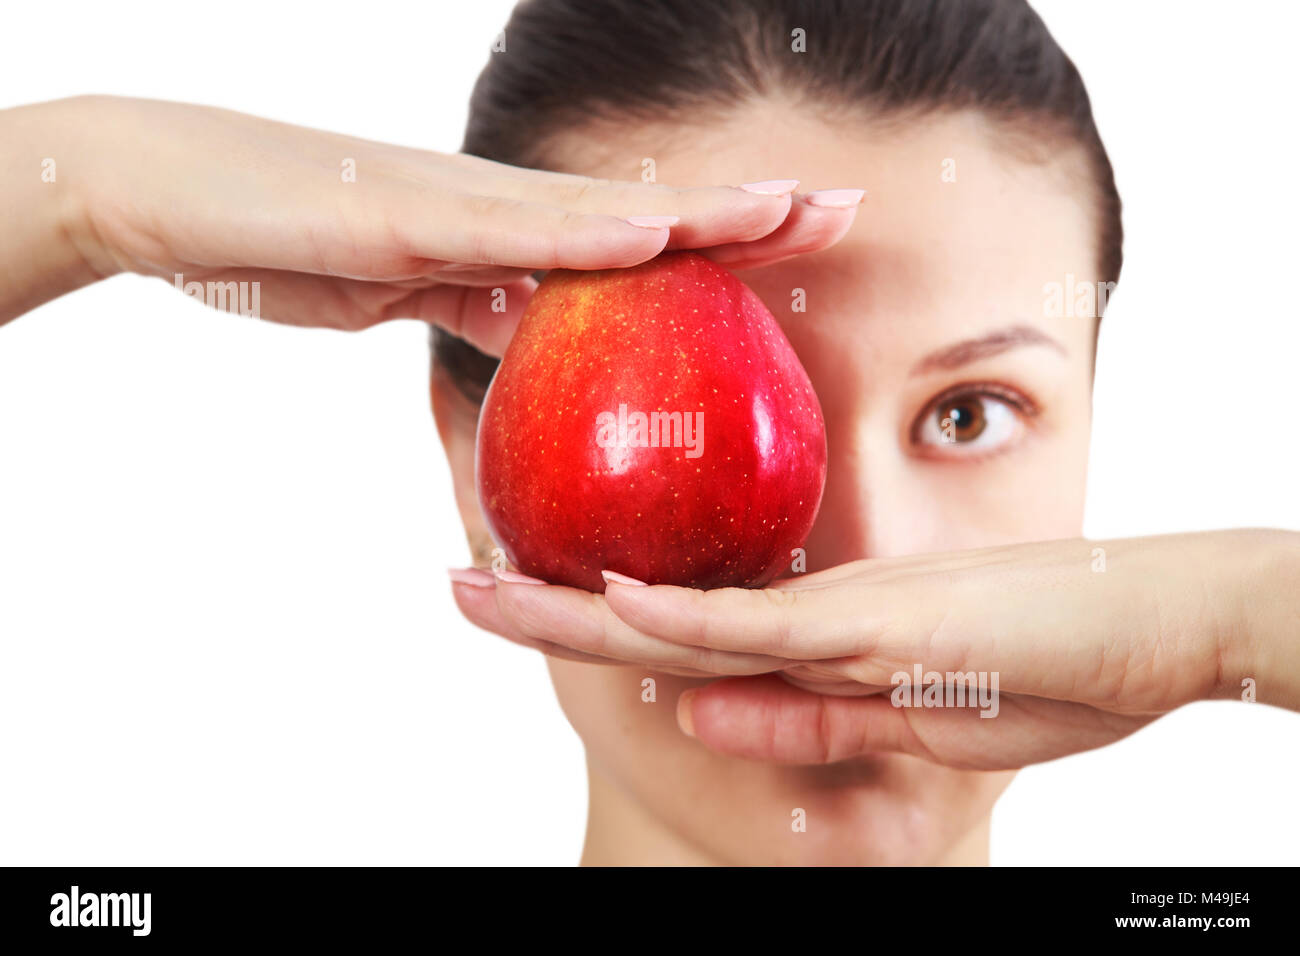 Diet concept. Brunette girl holding red apple at face level isolated on white background. Stock Photo